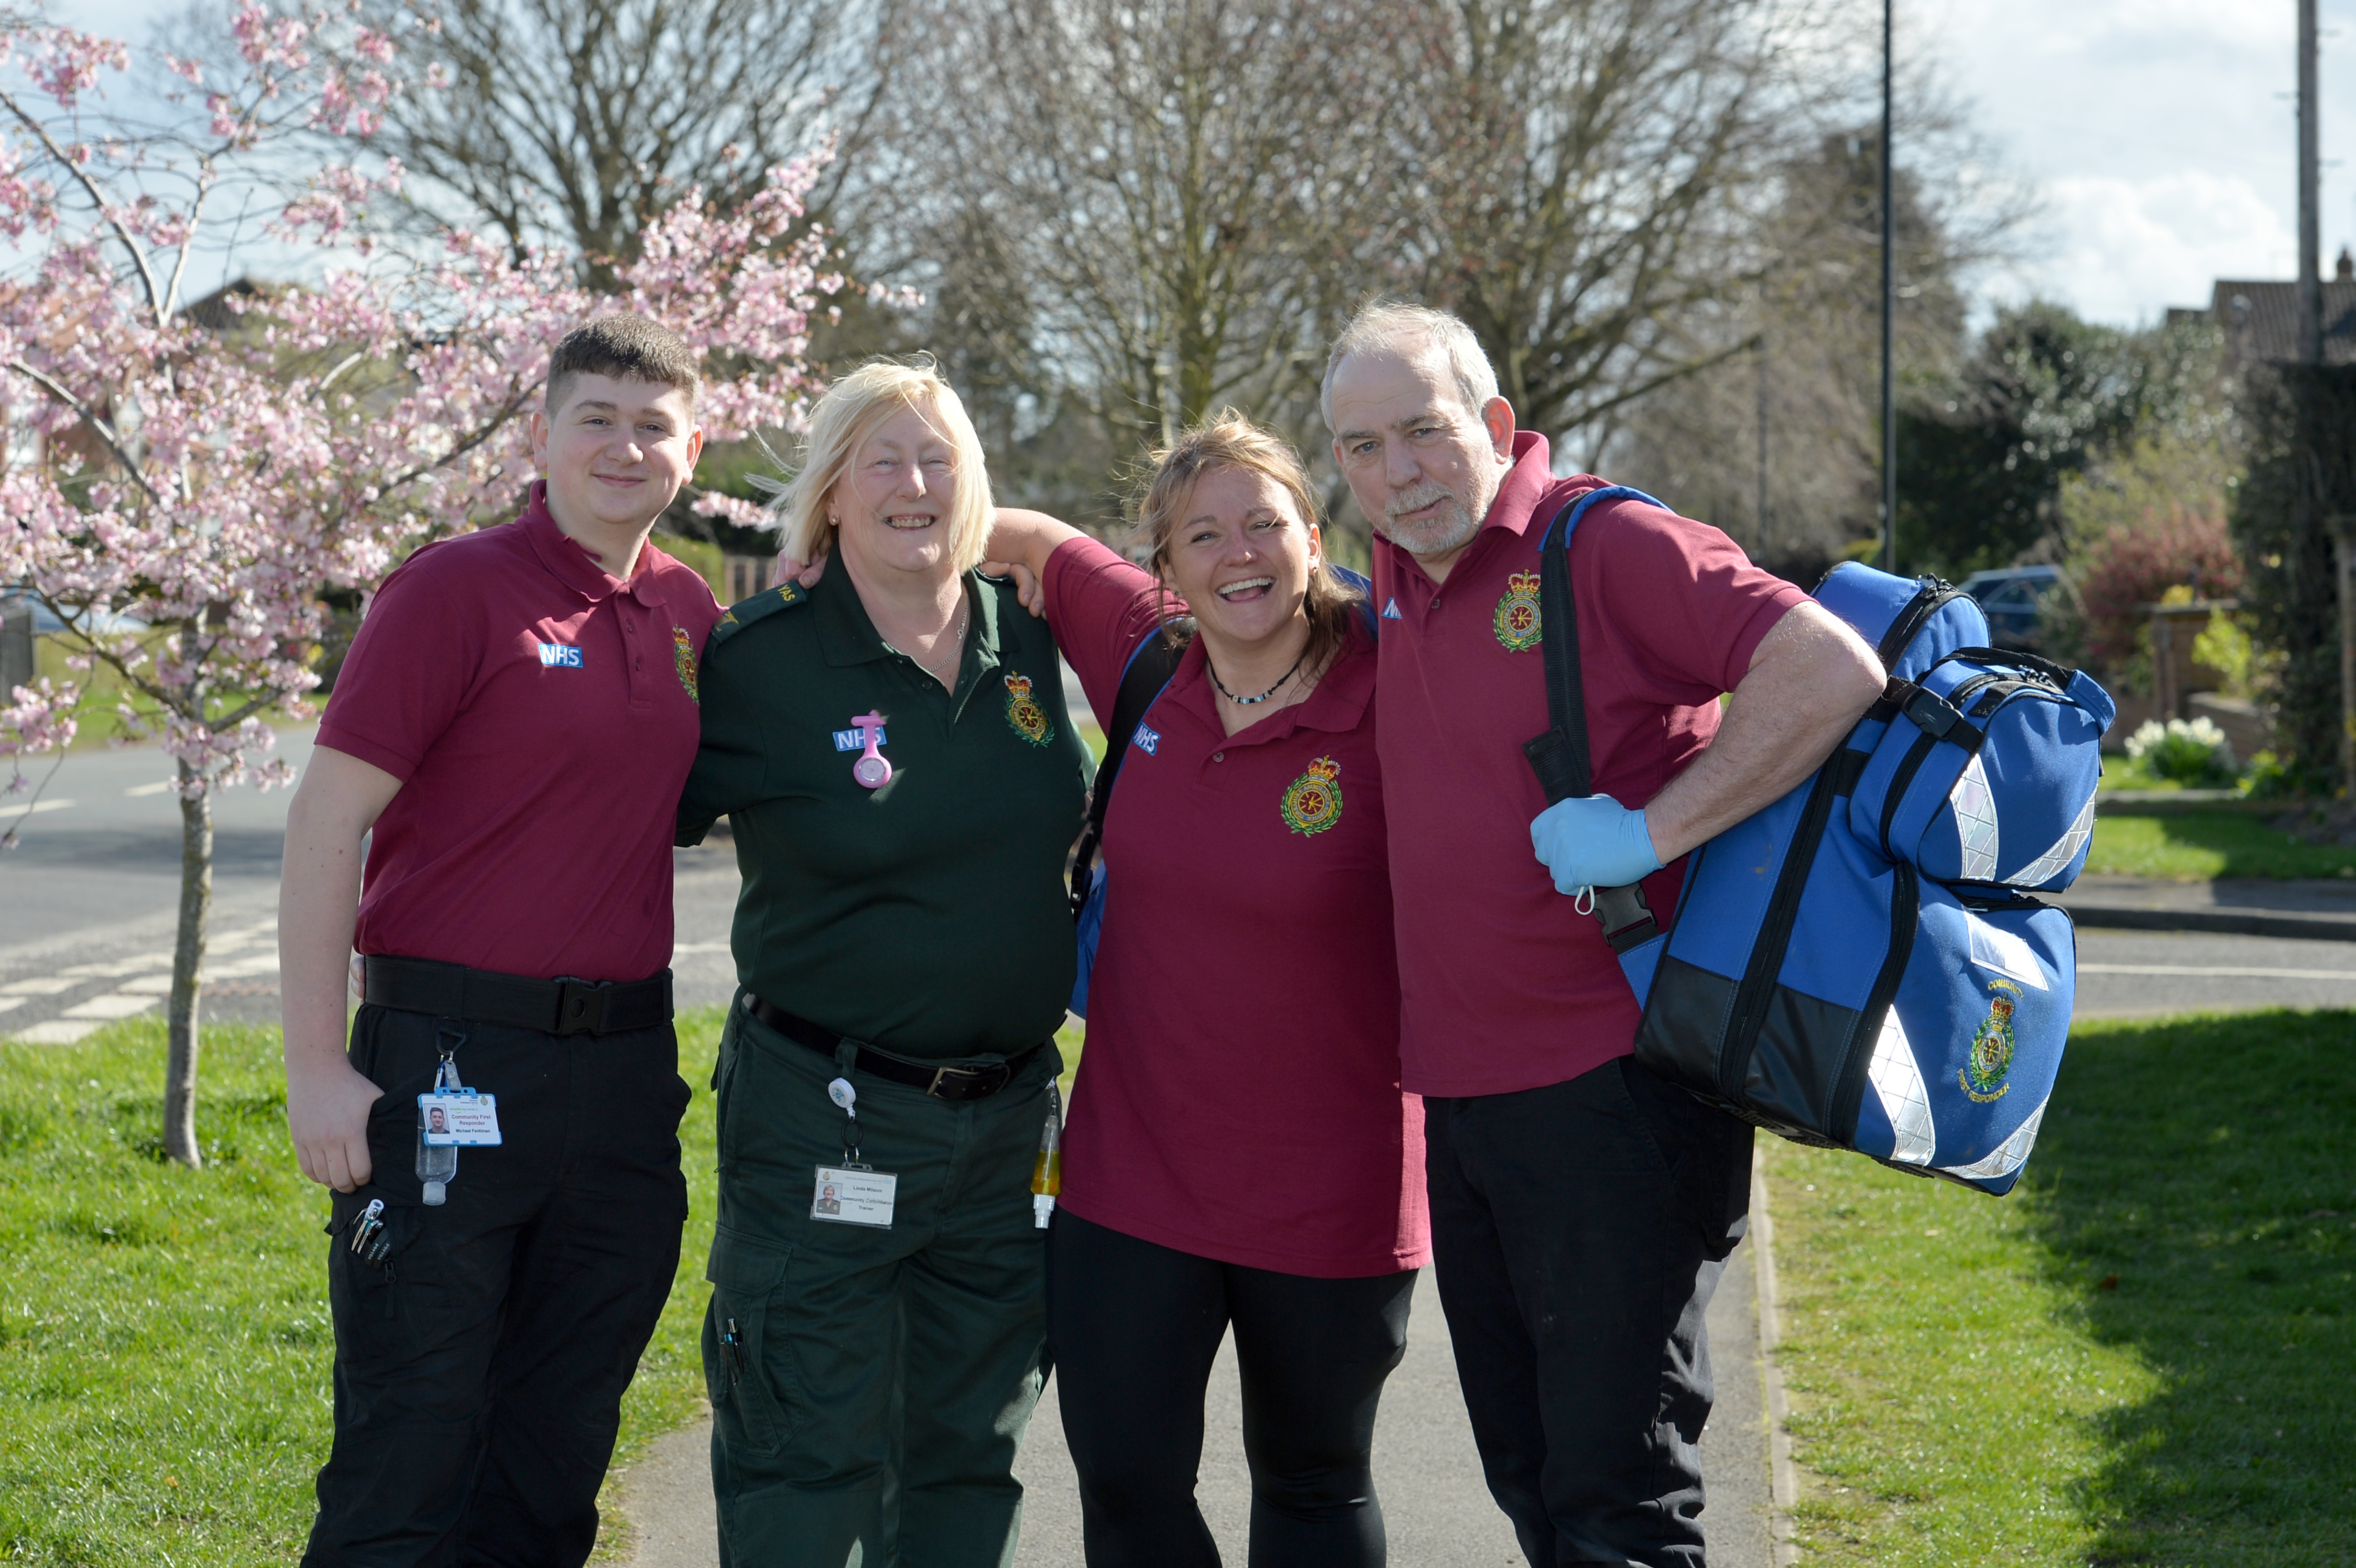 A group of Community First Responders